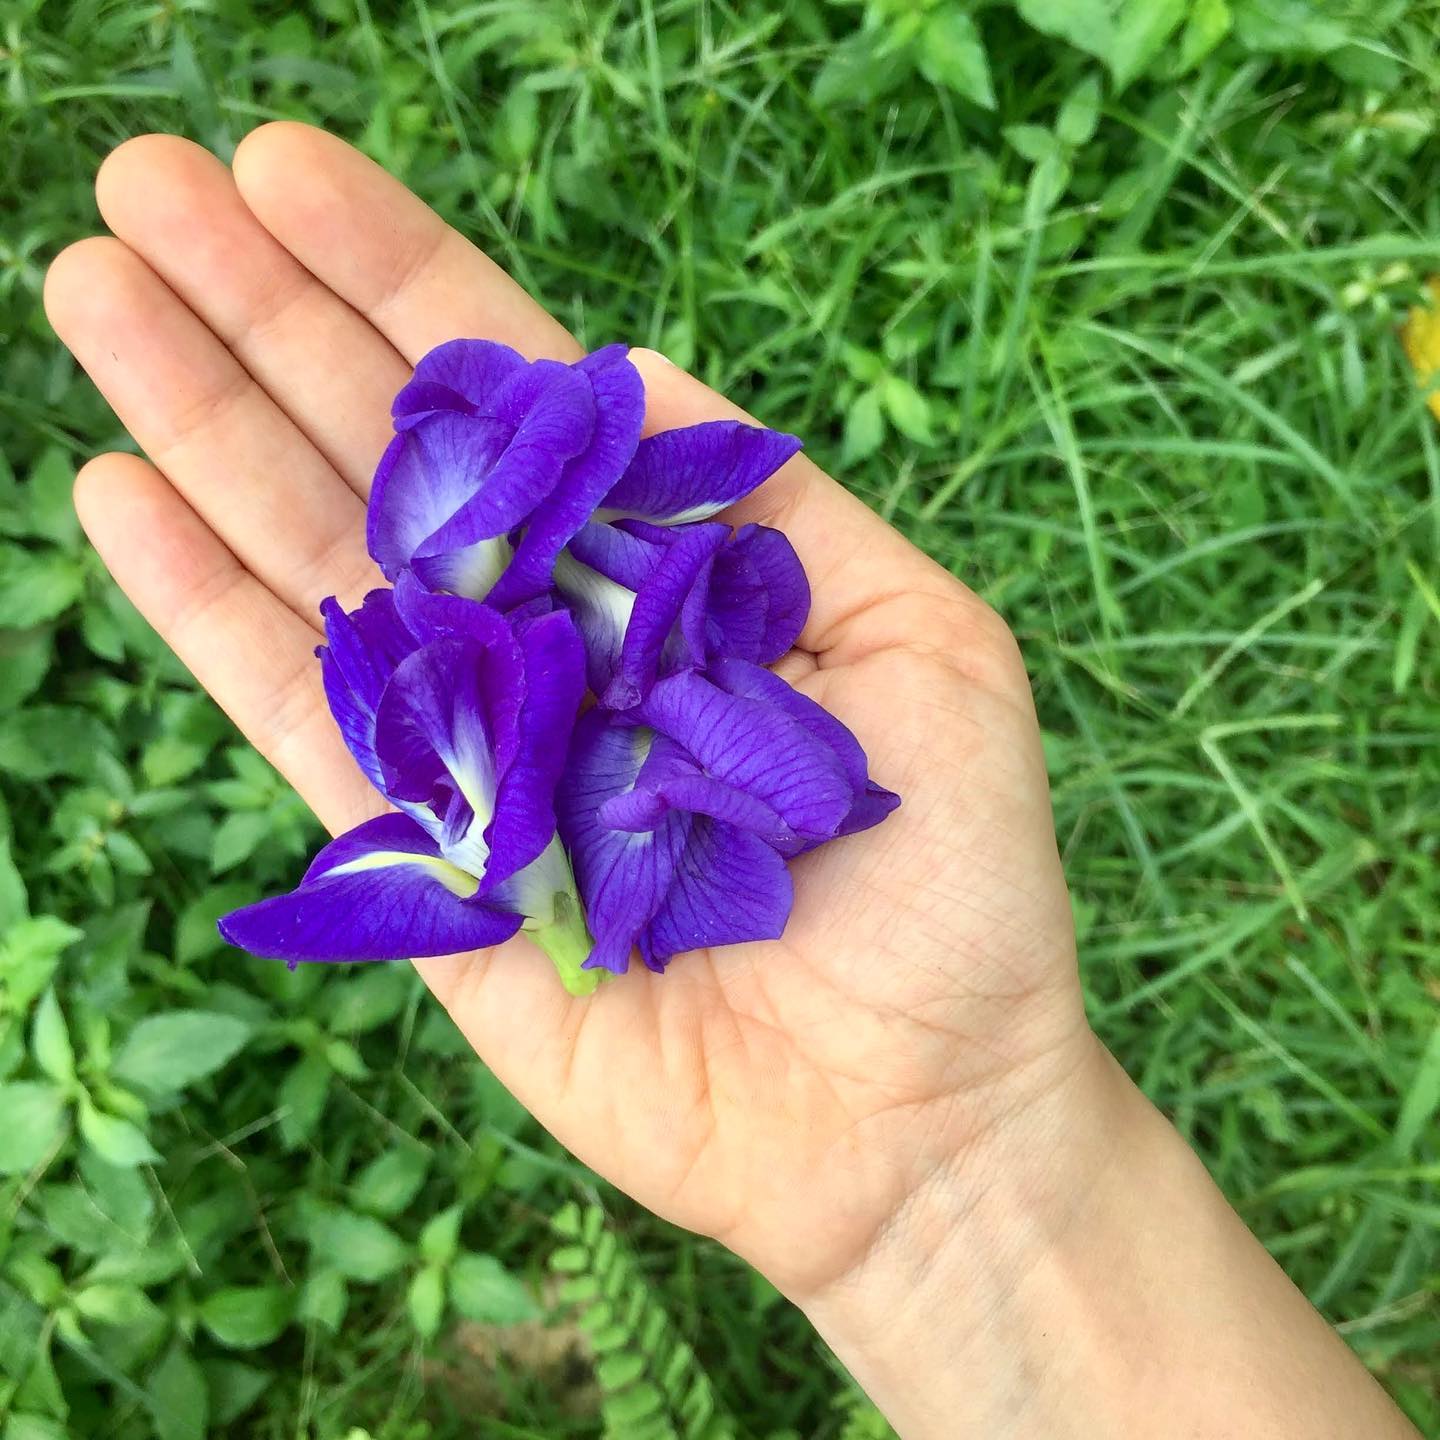 Person holding Blue Pea flowers in hand.